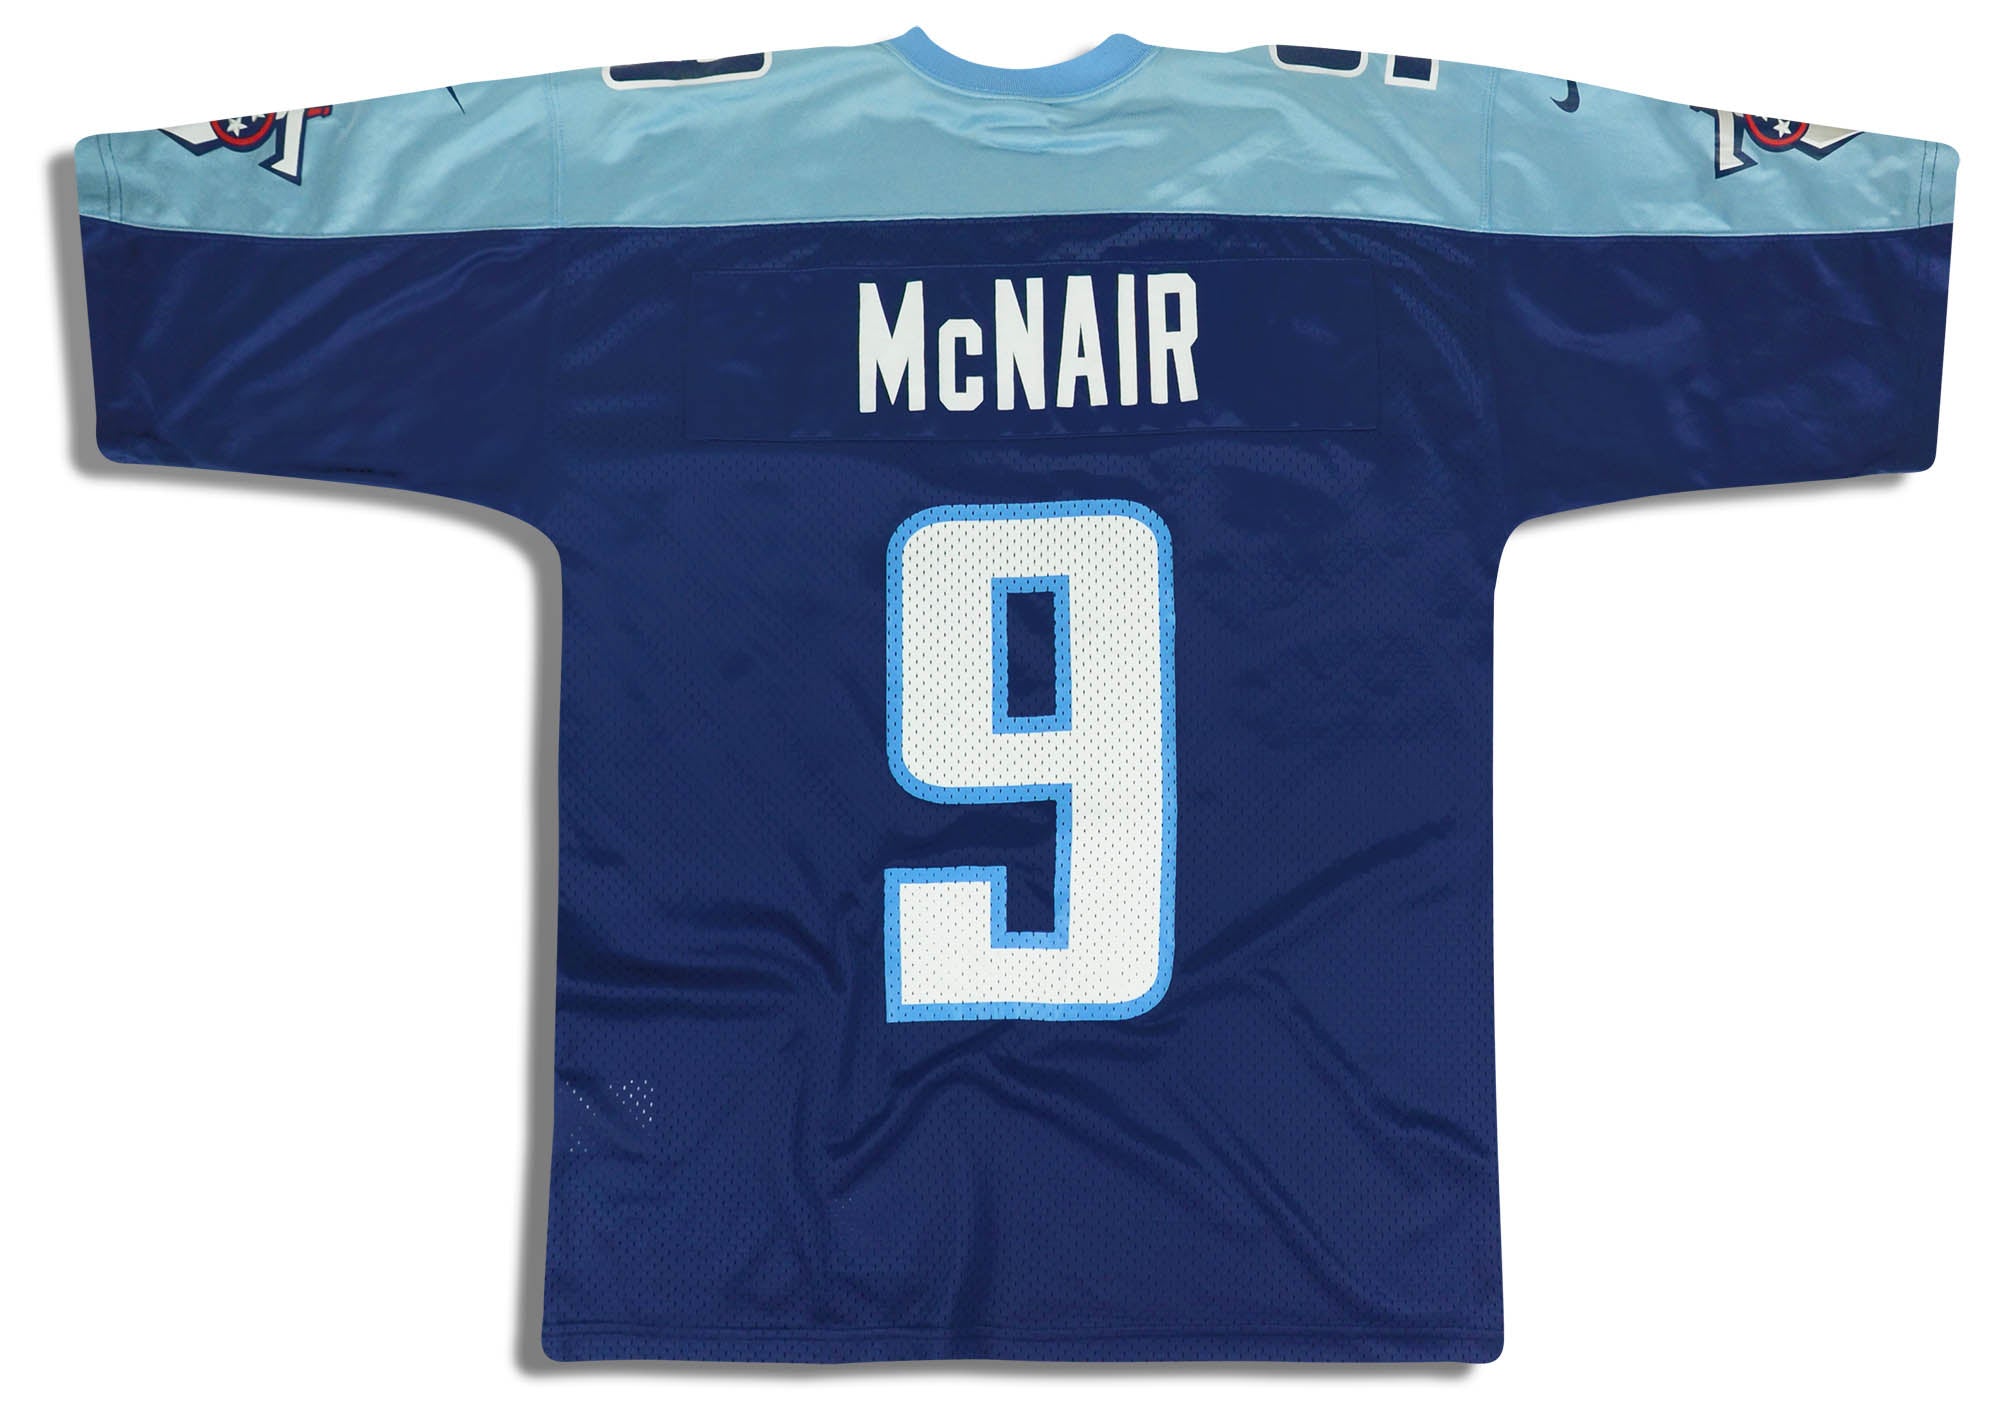 1999-00 TENNESSEE TITANS McNAIR #9 NIKE JERSEY (HOME) M